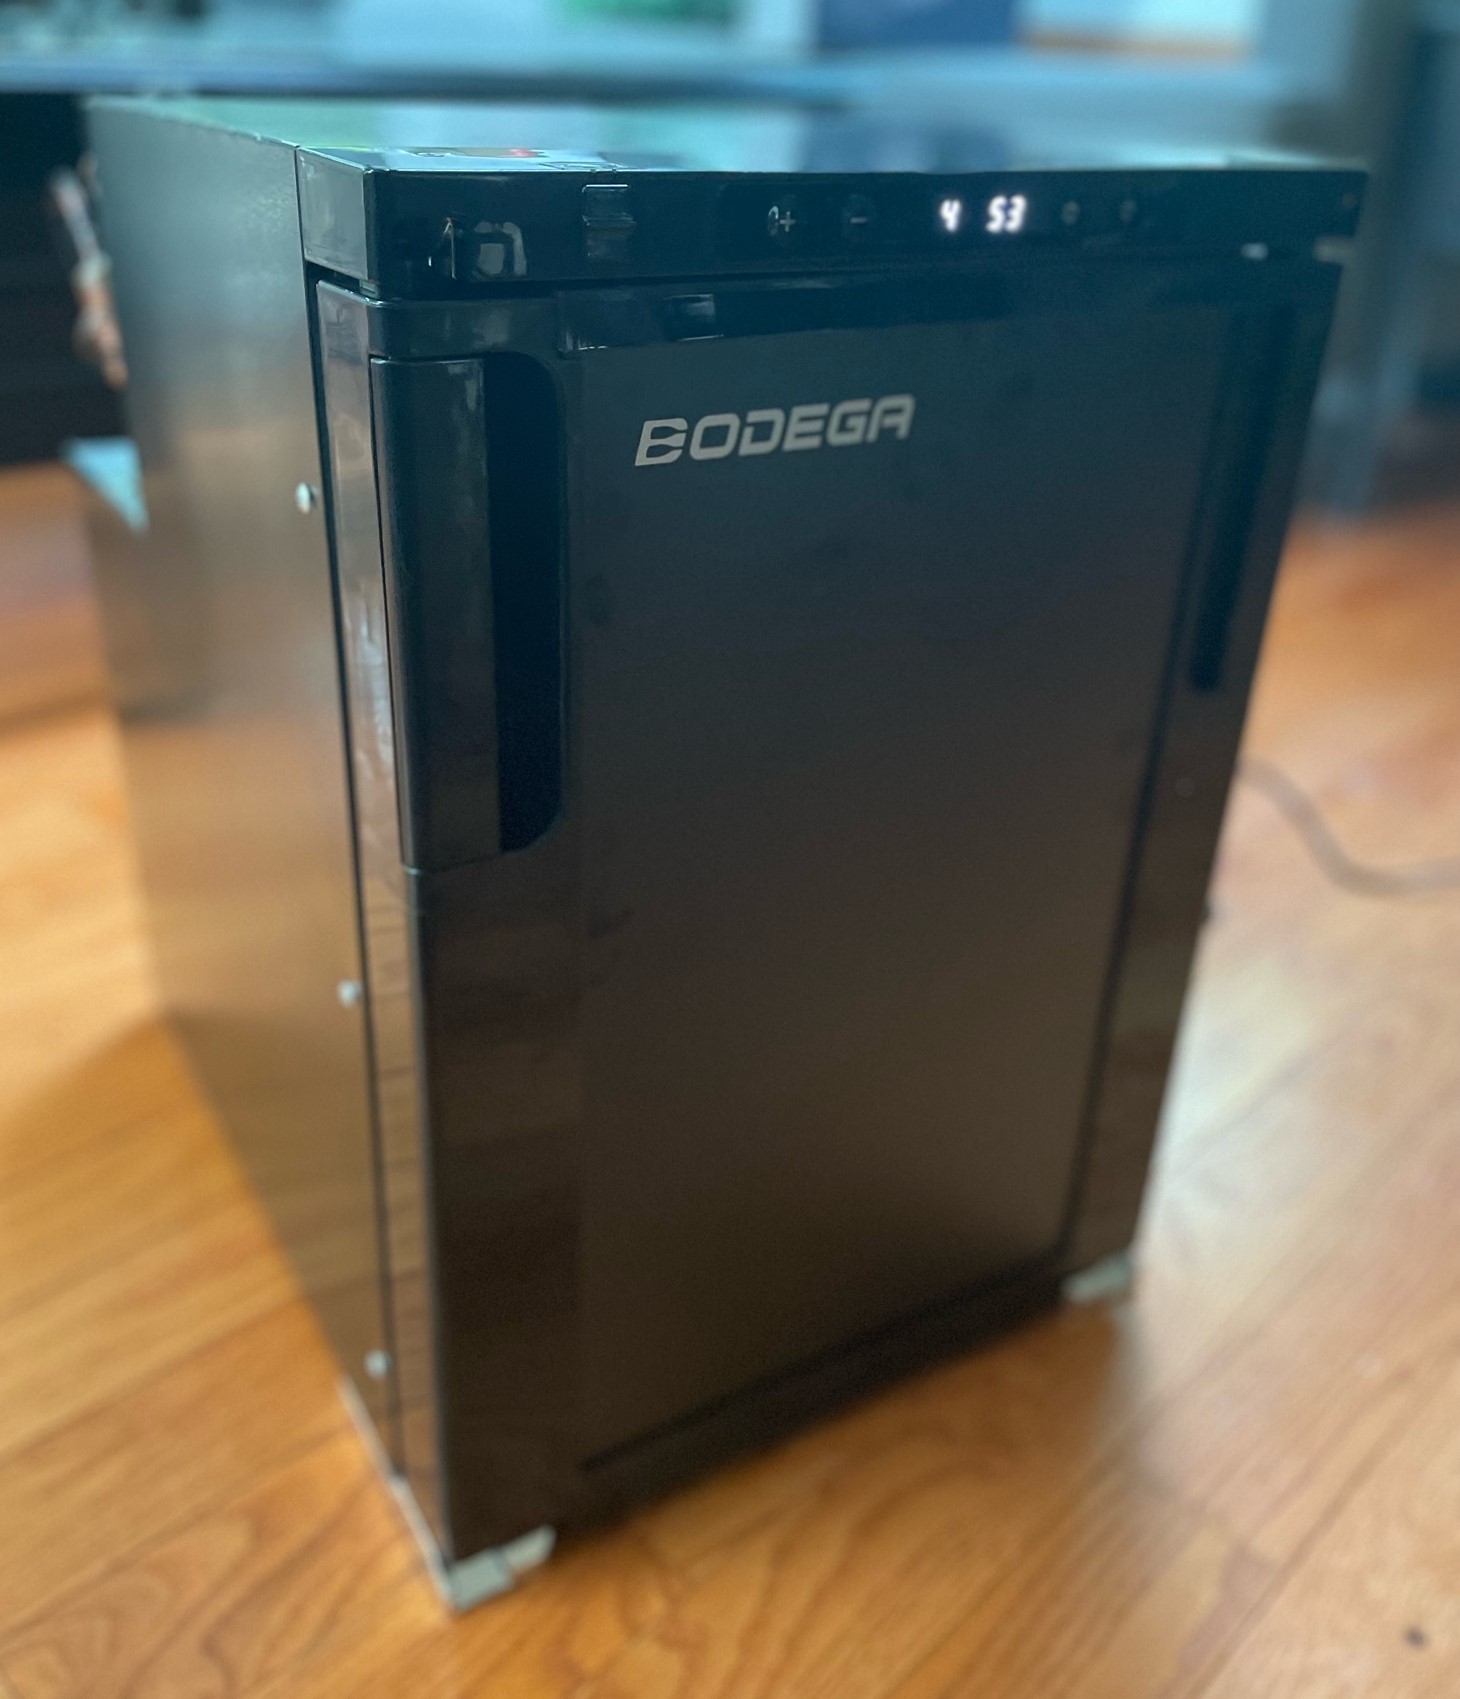 Bodega 12/24-volt RV Refrigerator review – Portable cooling when you need  it most - The Gadgeteer